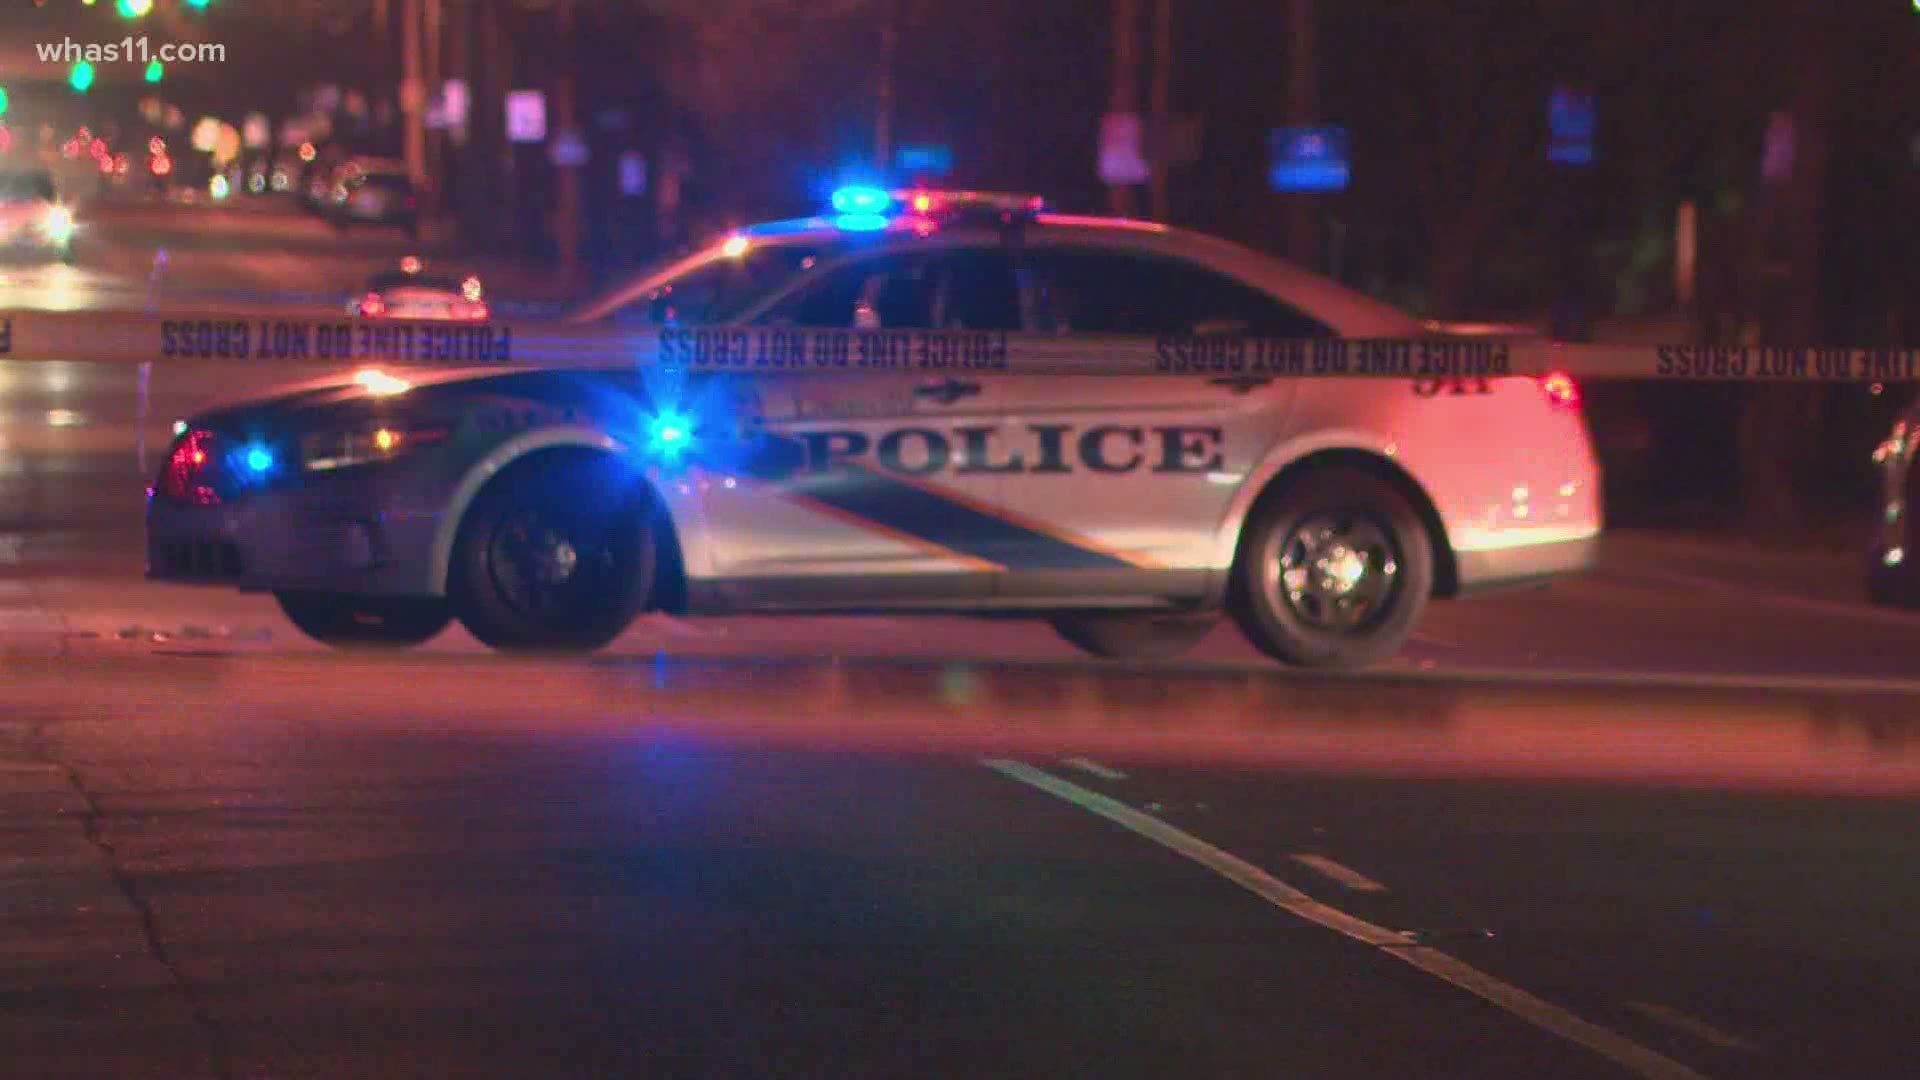 Louisville is already seeing its deadliest year ever, with 119 non-fatal shootings and 34 homicides reported as of Wednesday morning.